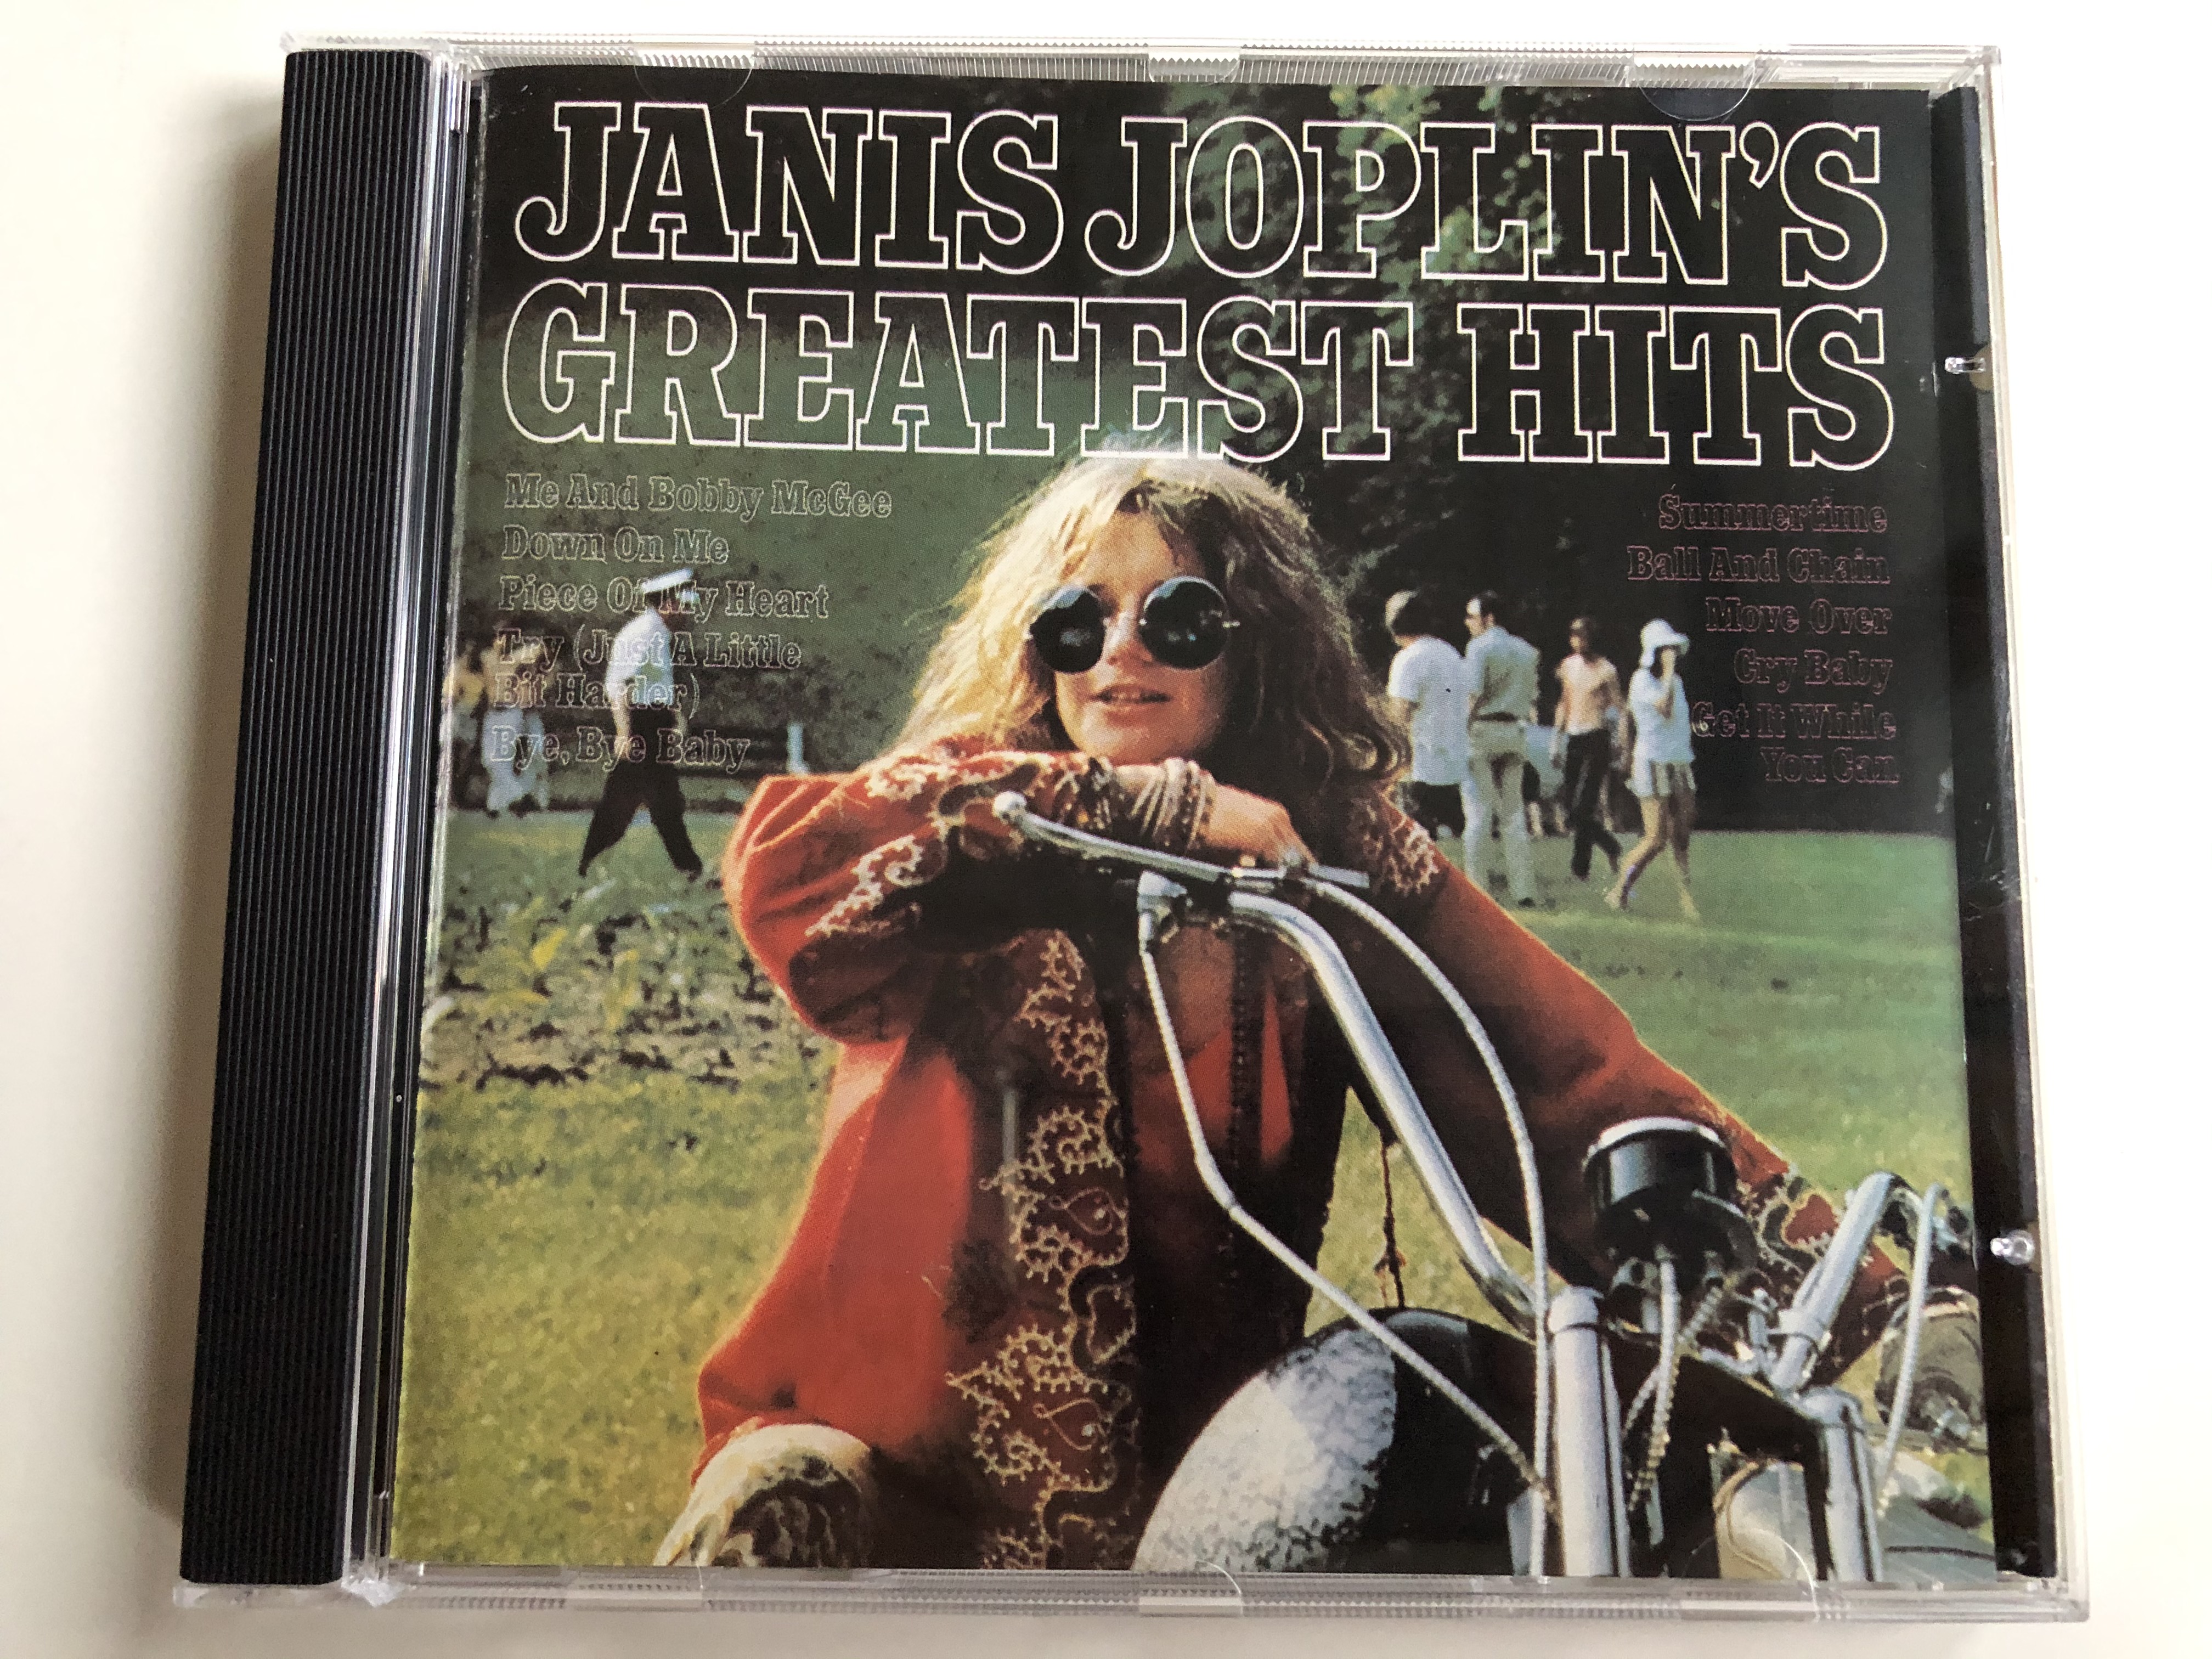 janis-joplin-s-greatest-hits-me-and-bobby-mcgee-down-on-me-piece-of-my-heart-try-just-a-little-bit-harder-bye-bye-baby-cbs-audio-cd-cd-32190-1-.jpg